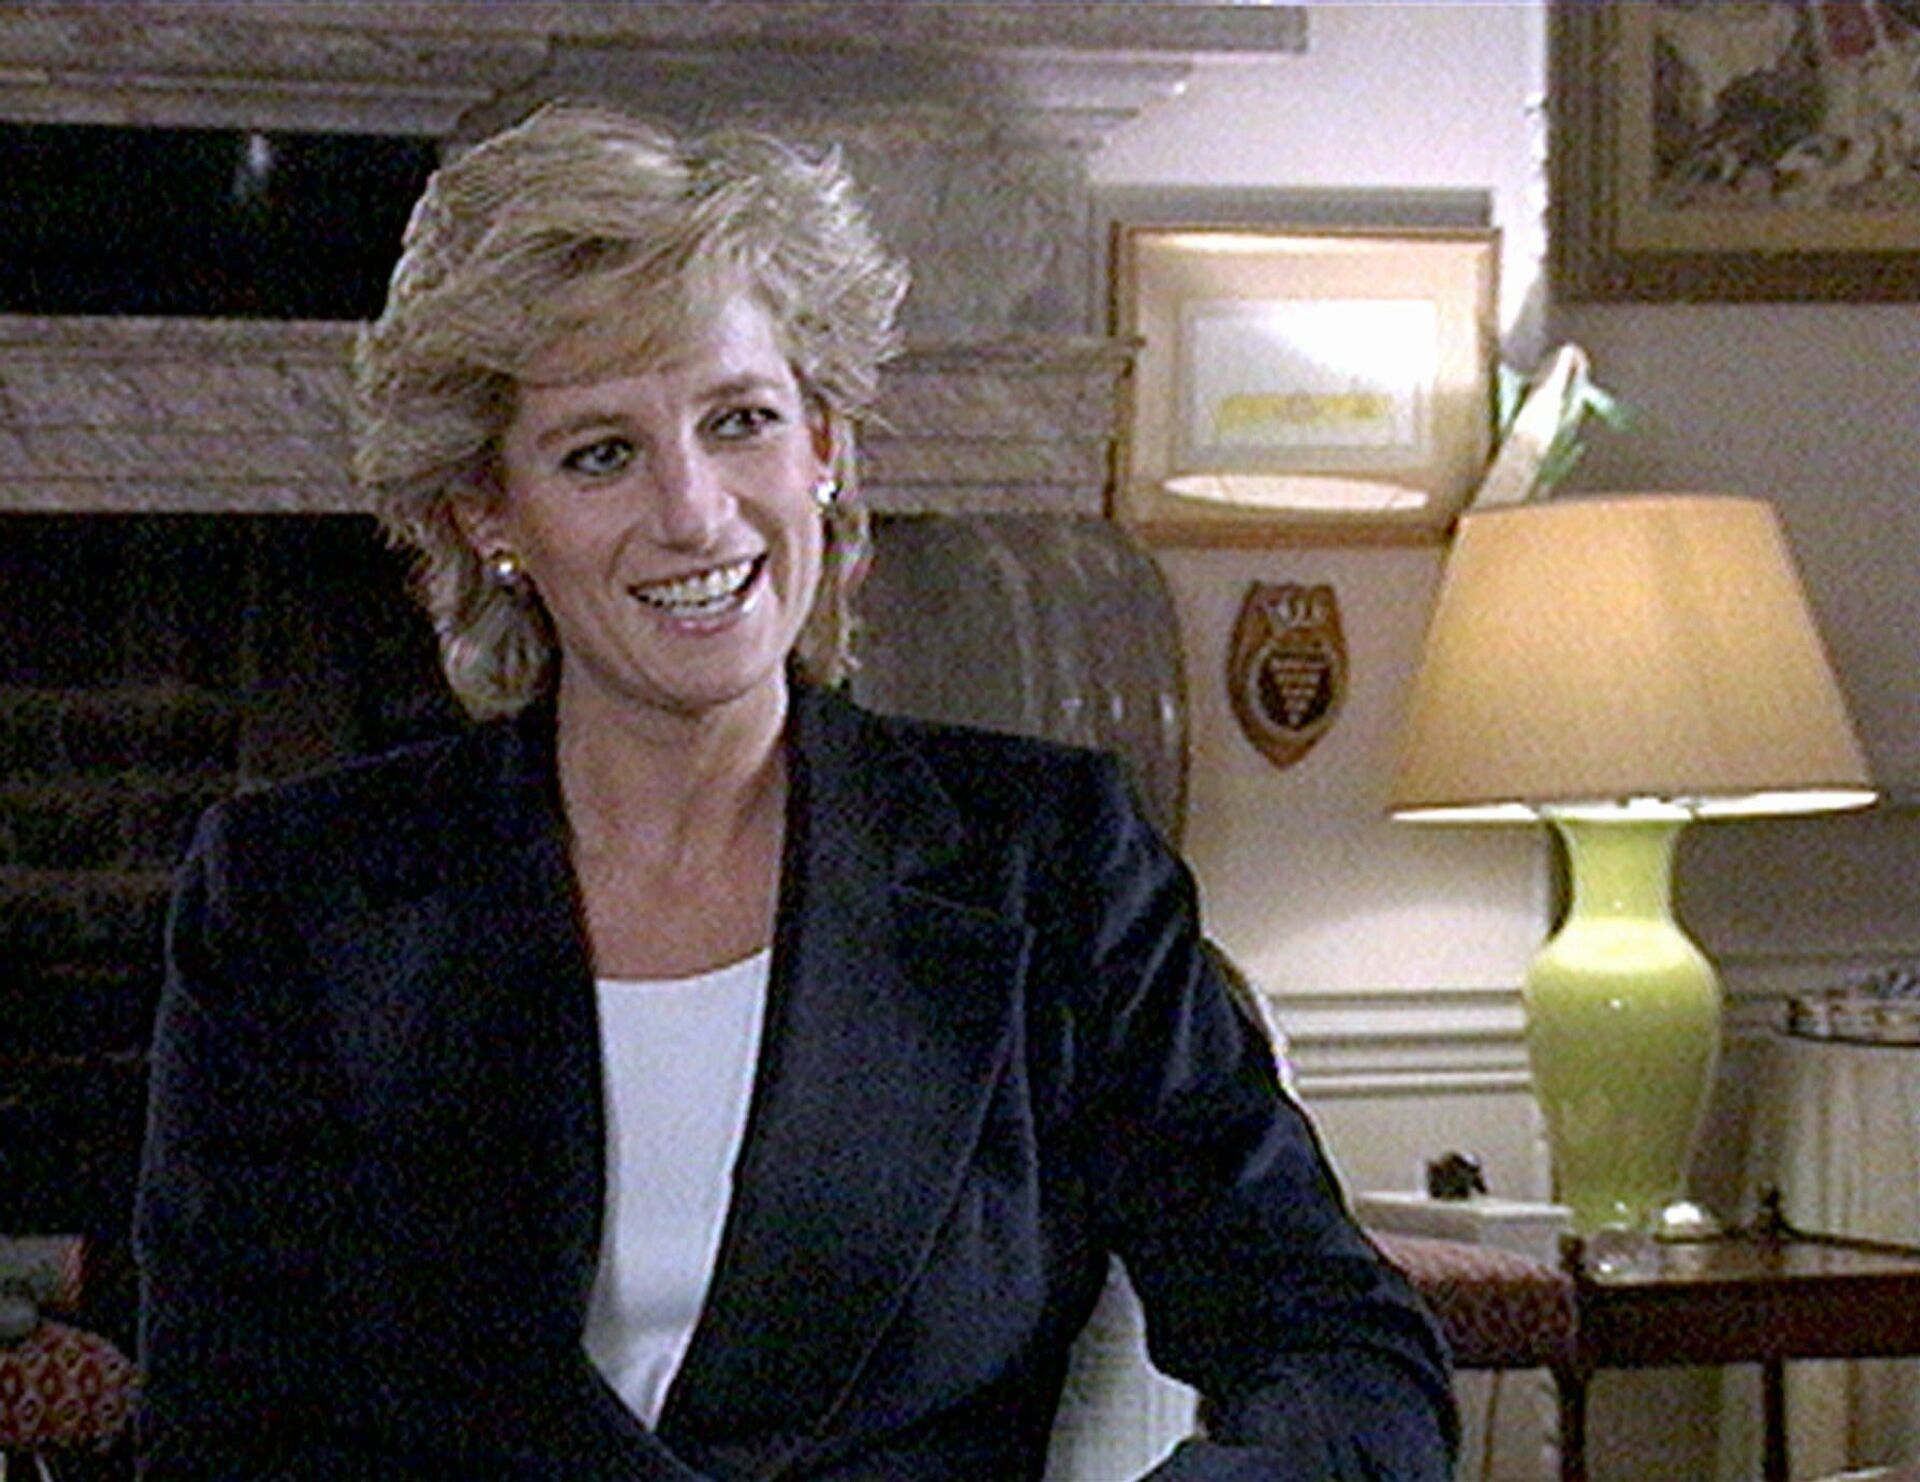 Princess Diana Reportedly Accused of 'Smearing' the Queen, Prince Charles by Panorama Interviewer  - Sputnik International, 1920, 20.03.2021